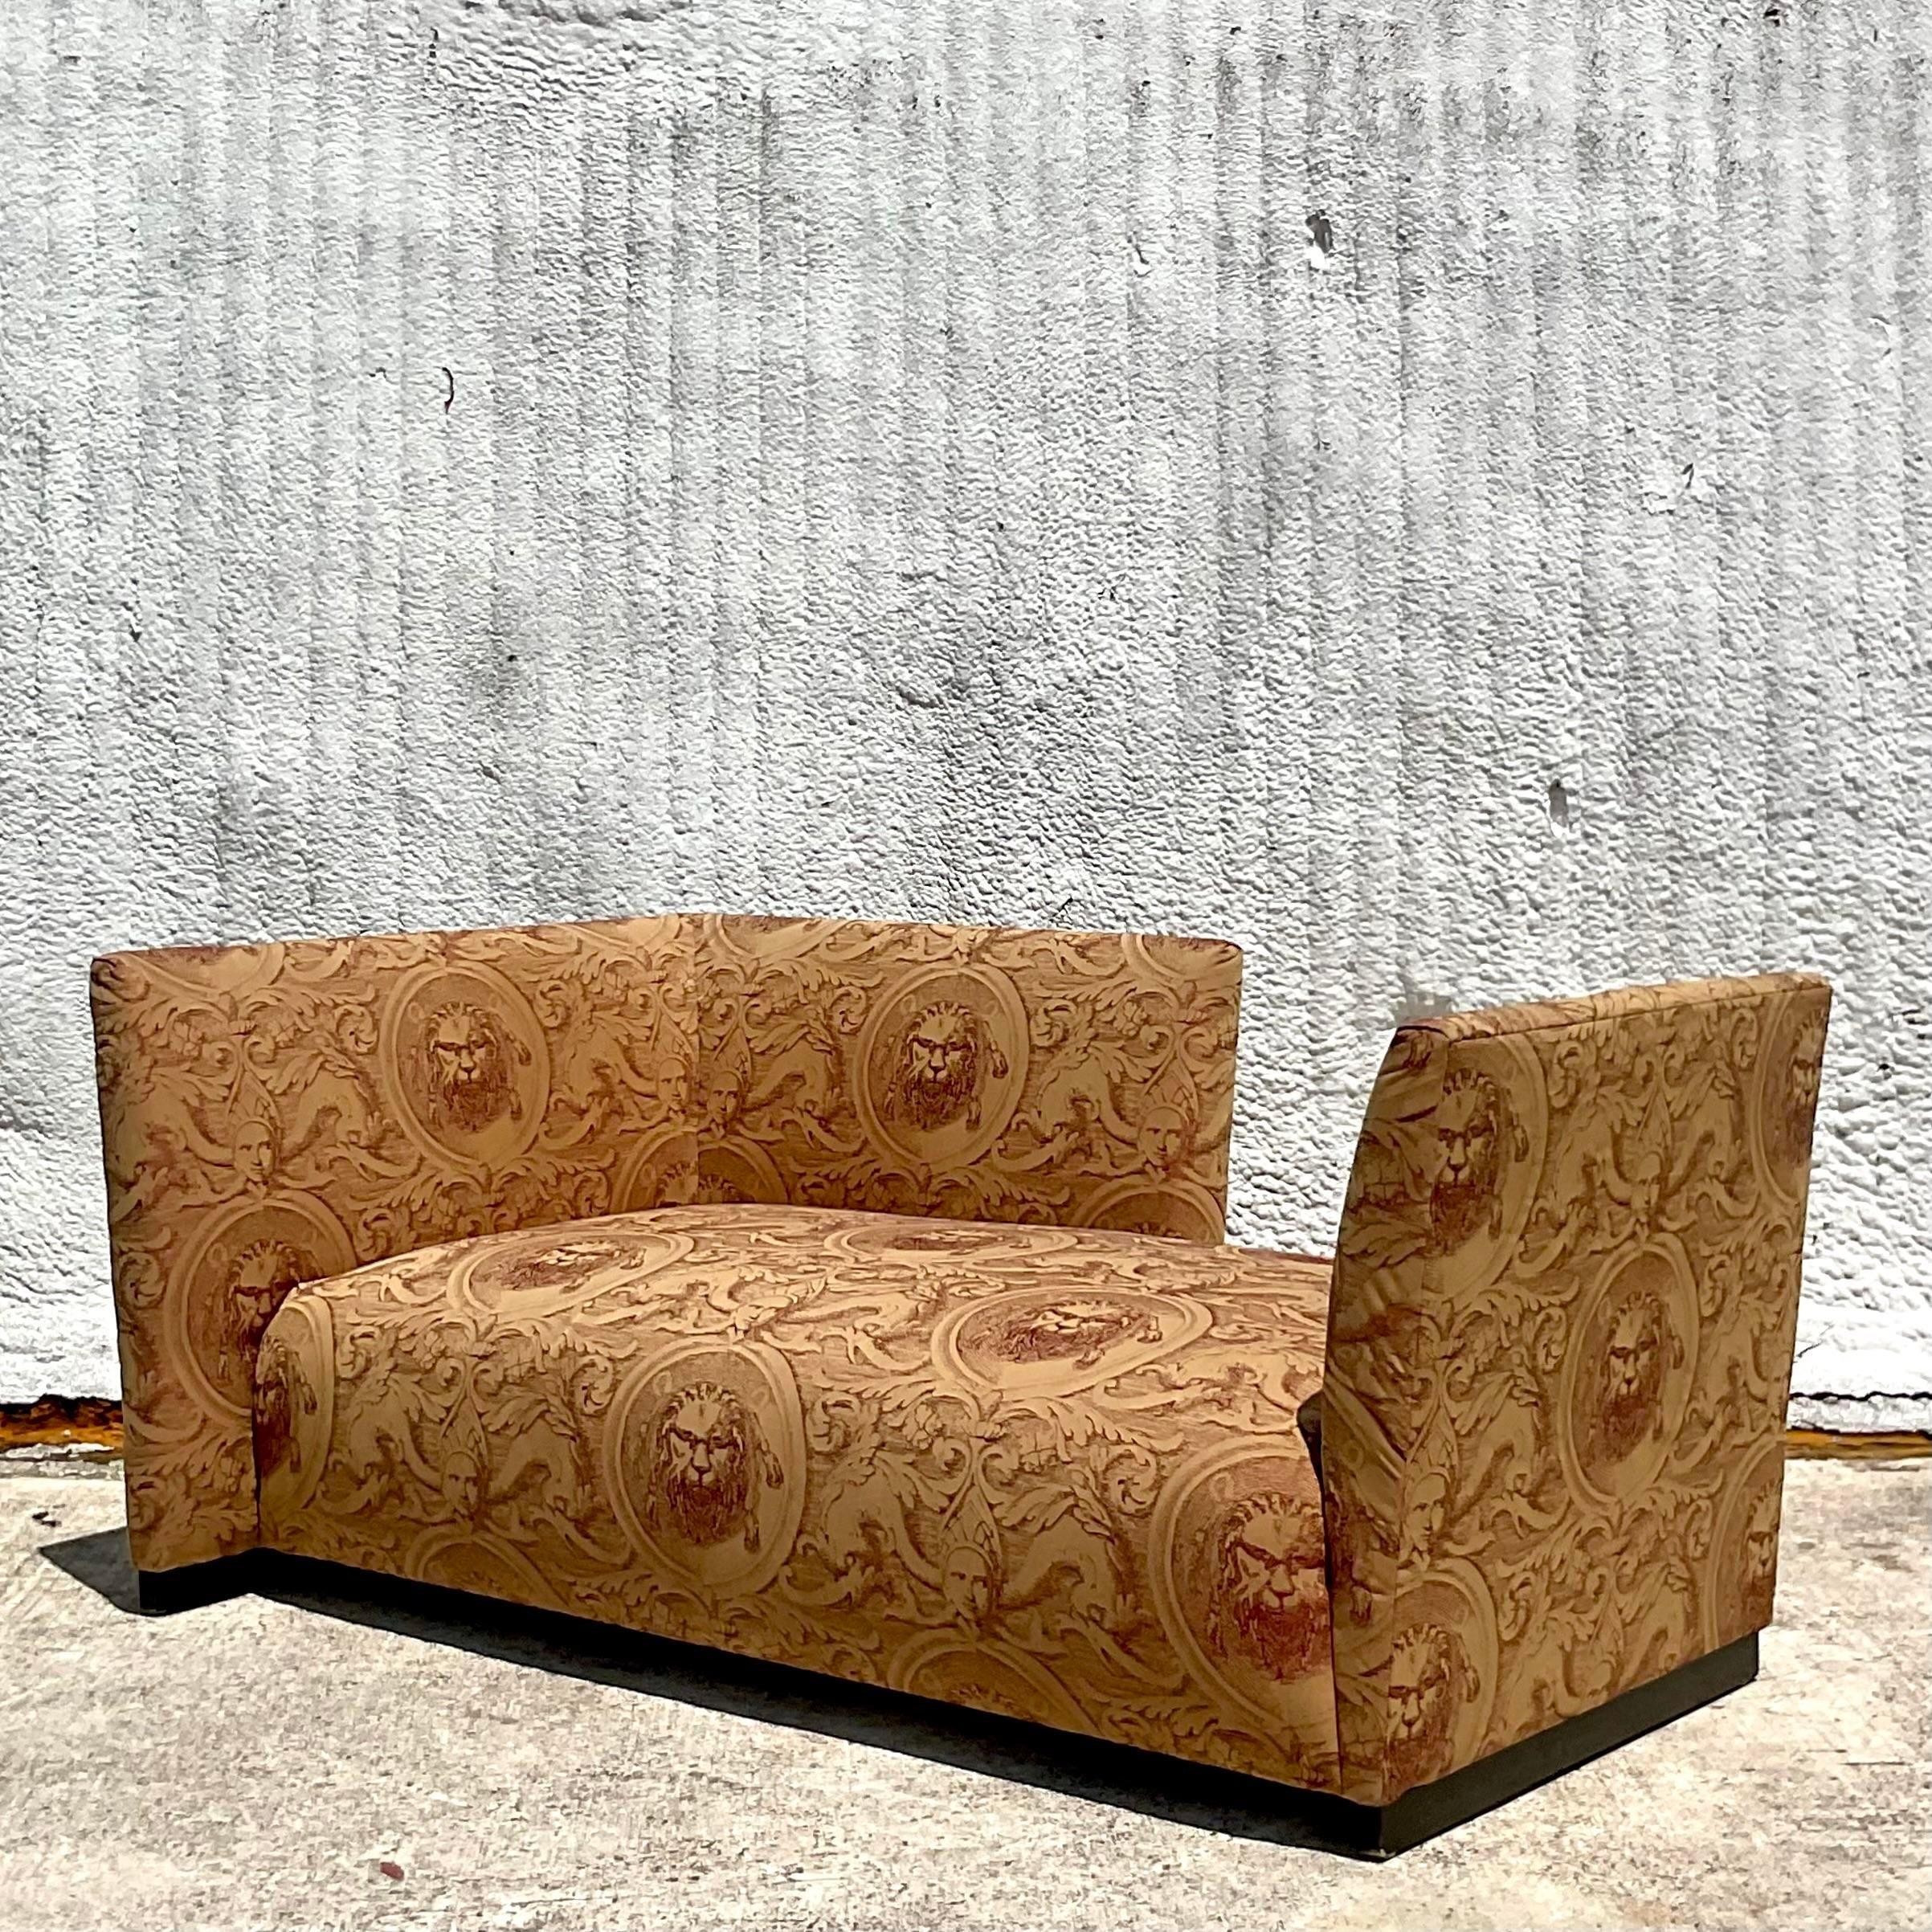 A fabulous vintage Postmodern chaise. A classic Tete A Tete sofa with high backs on each end. A perfect place to curl up and read a book. A chic lions head printed jacquard upholstery. Acquired from a Palm Beach estate.